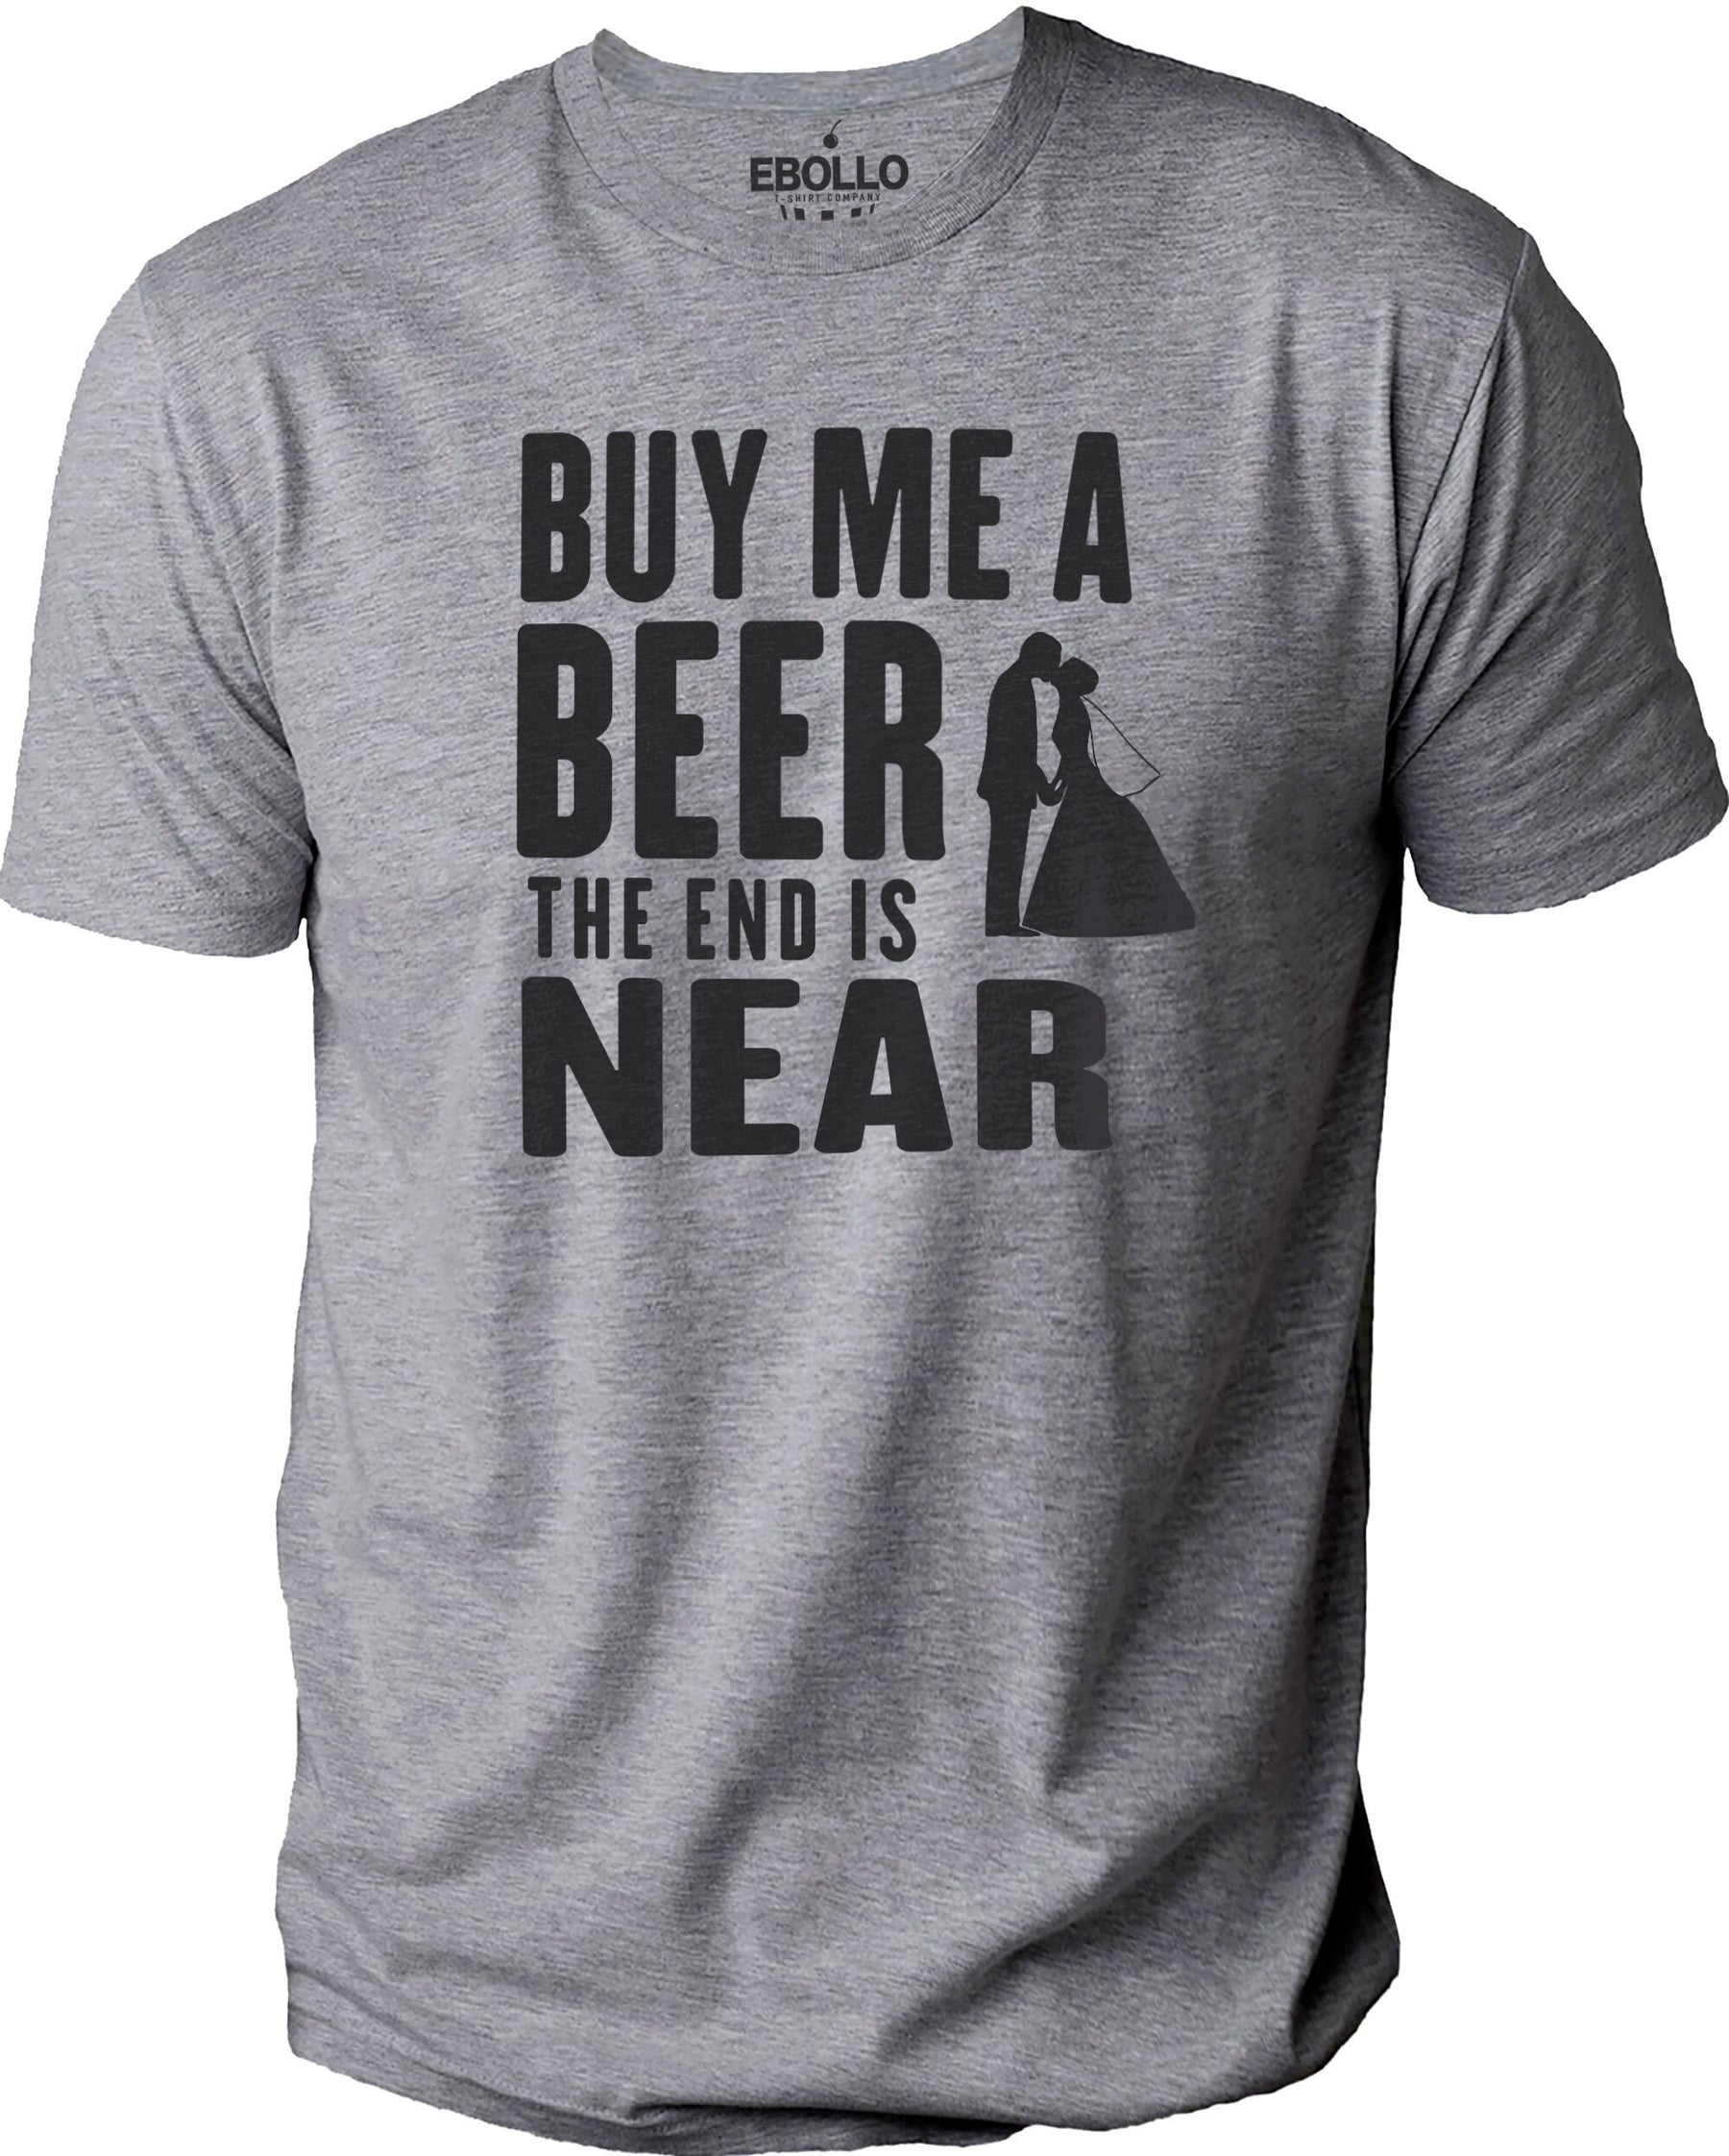 Mysterieus bedriegen Billy Goat Buy Me a Beer The End Is Near Shirt | Funny Shirt Men, Bachelor Party Gift,  Gift for Boyfriend, Funny Bachelor Gift, Shirt for Single Friend |  eBollo.com